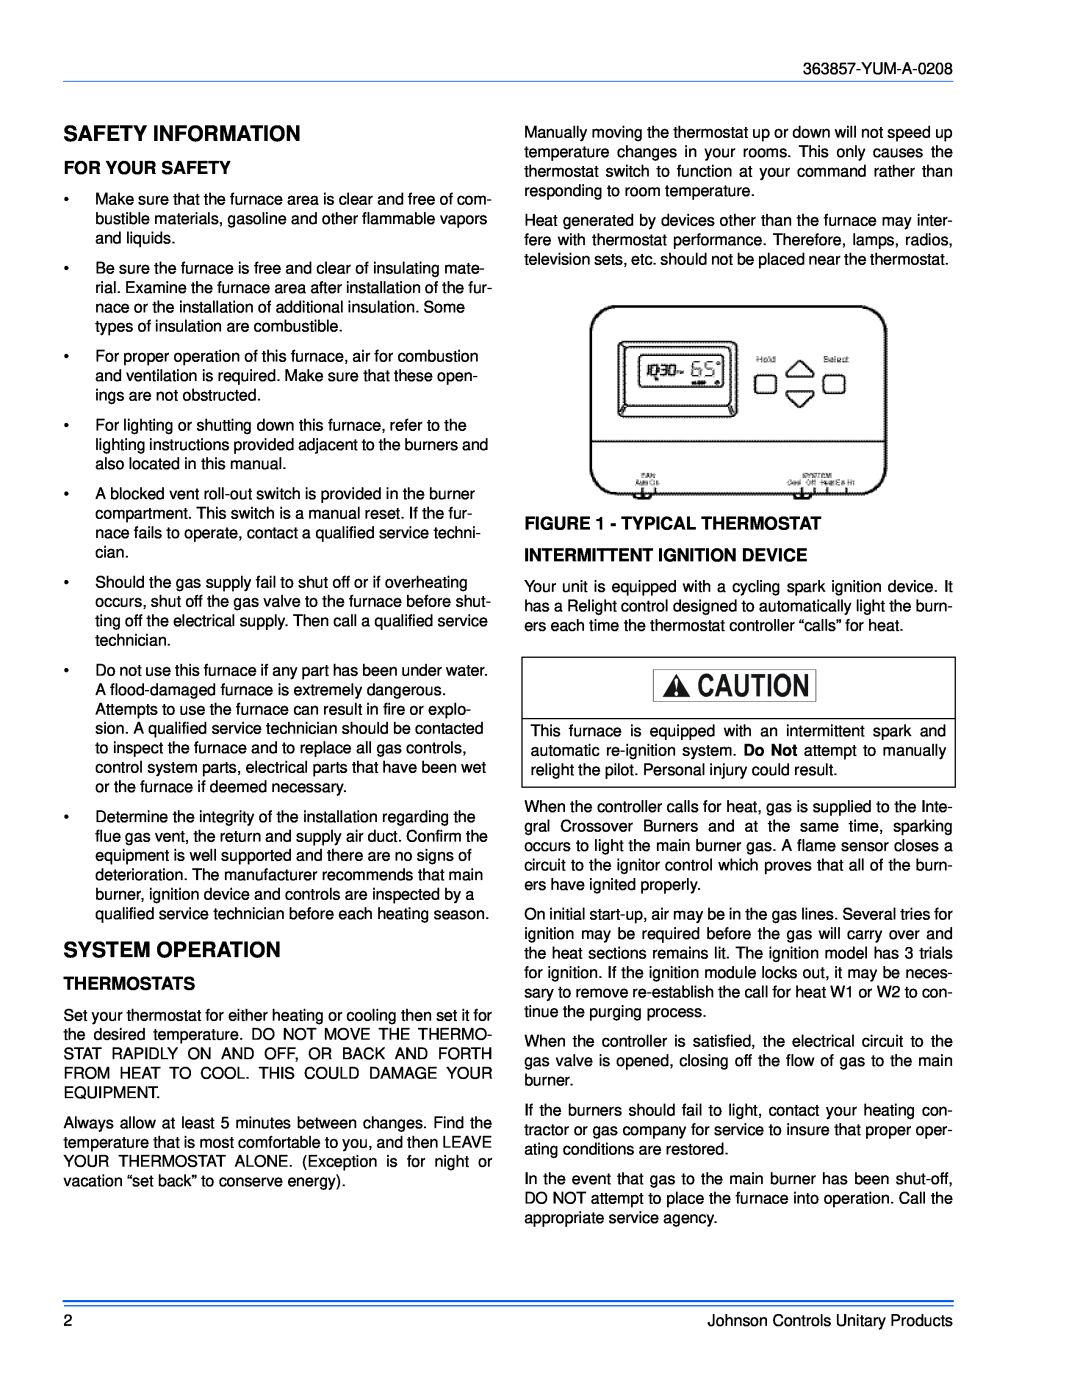 York 363857-YUM-A-0208 manual Safety Information, System Operation, For Your Safety, Thermostats, Typical Thermostat 